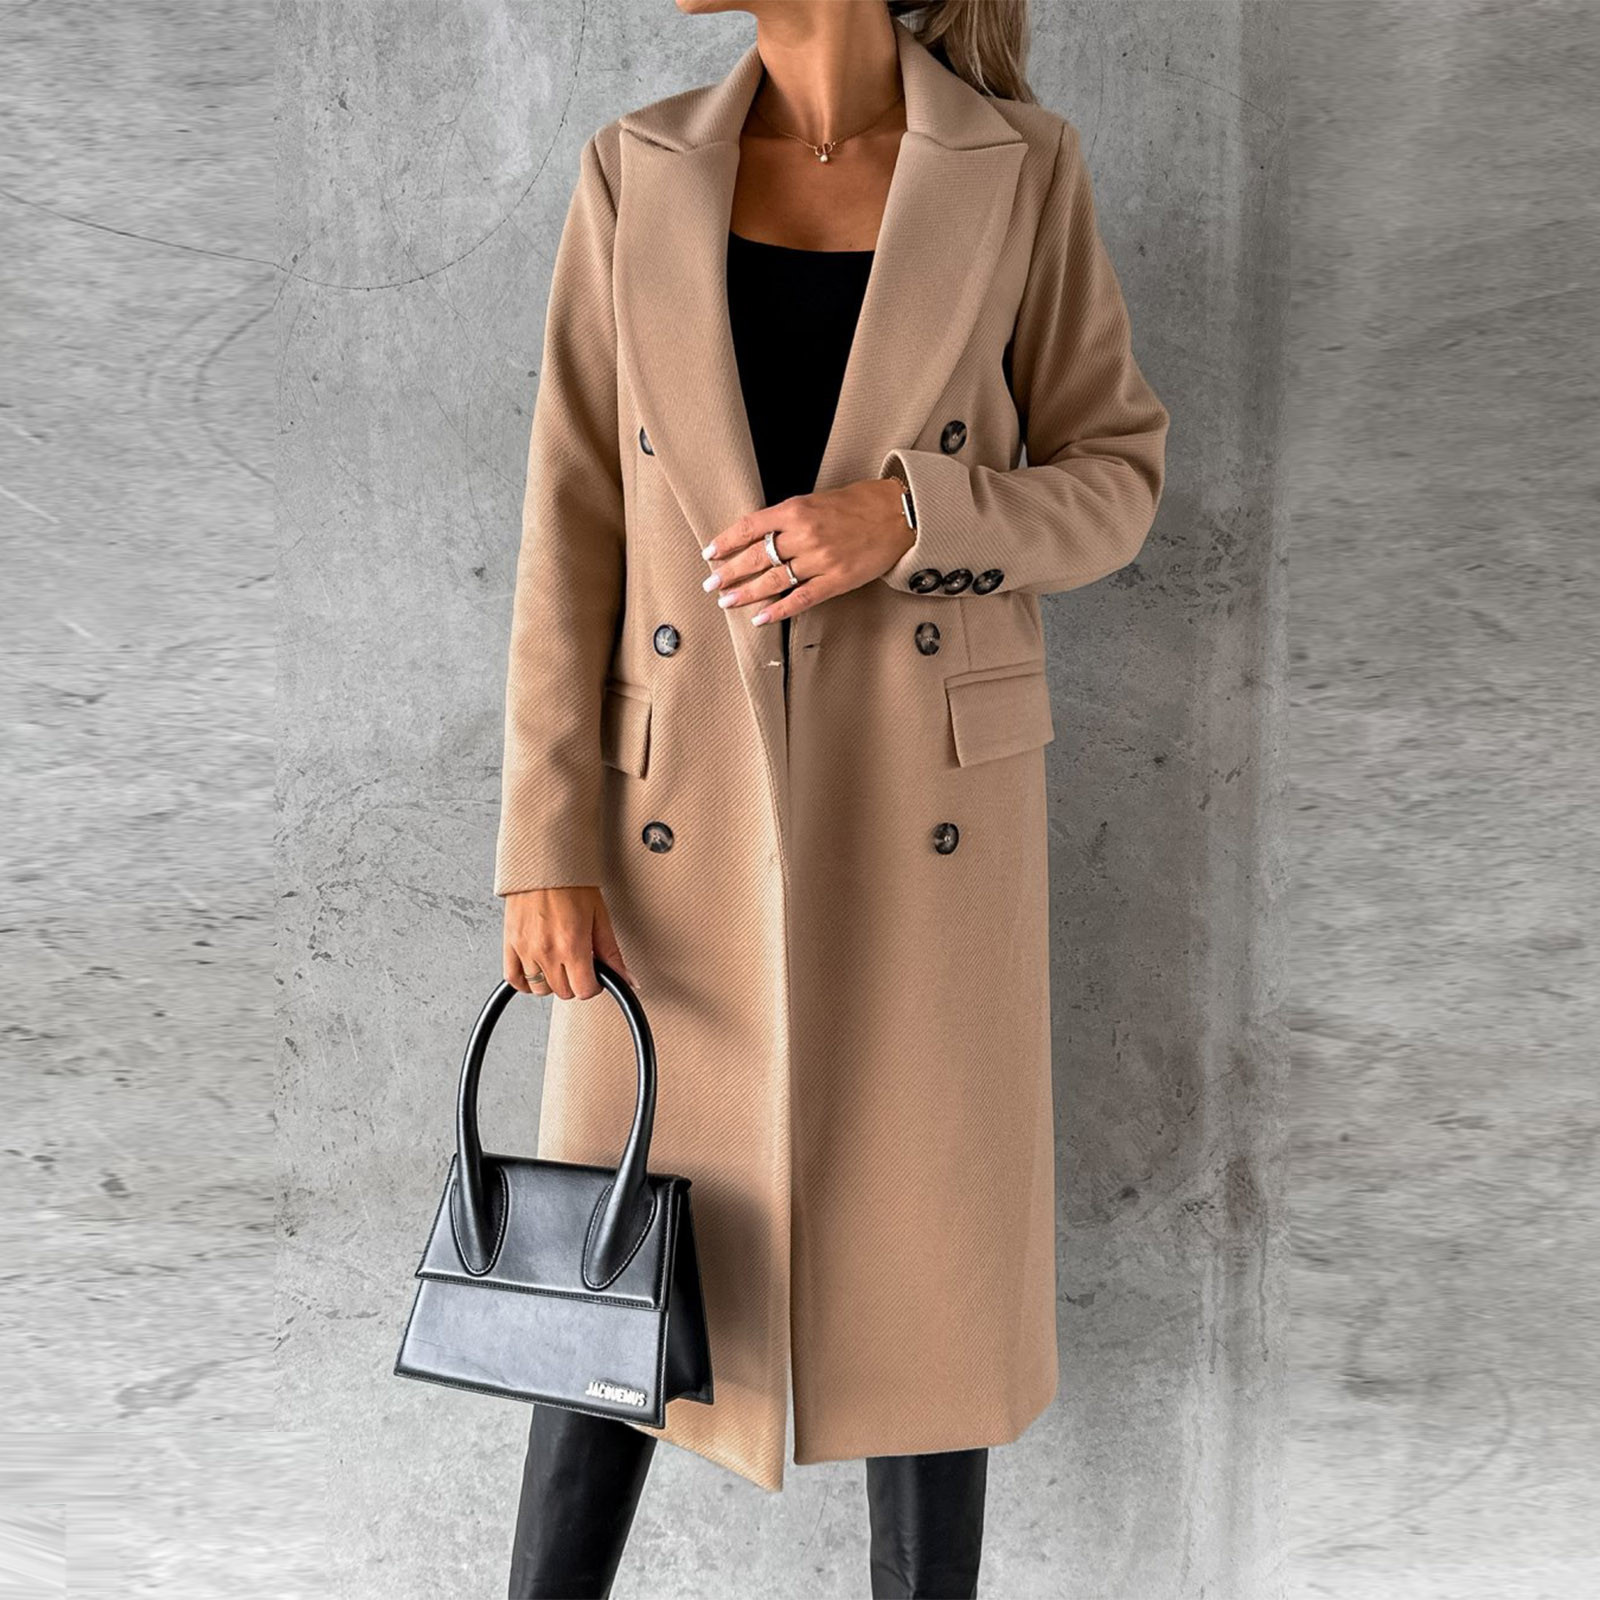 Hfyihgf Women's Double Breasted Trench Coat Classic Notch Collar Long Sleeve Peacoats Winter Warm Slim Fit Long Woolen Jackets Coat with Pockets Clearance(Khaki,L) - image 2 of 5